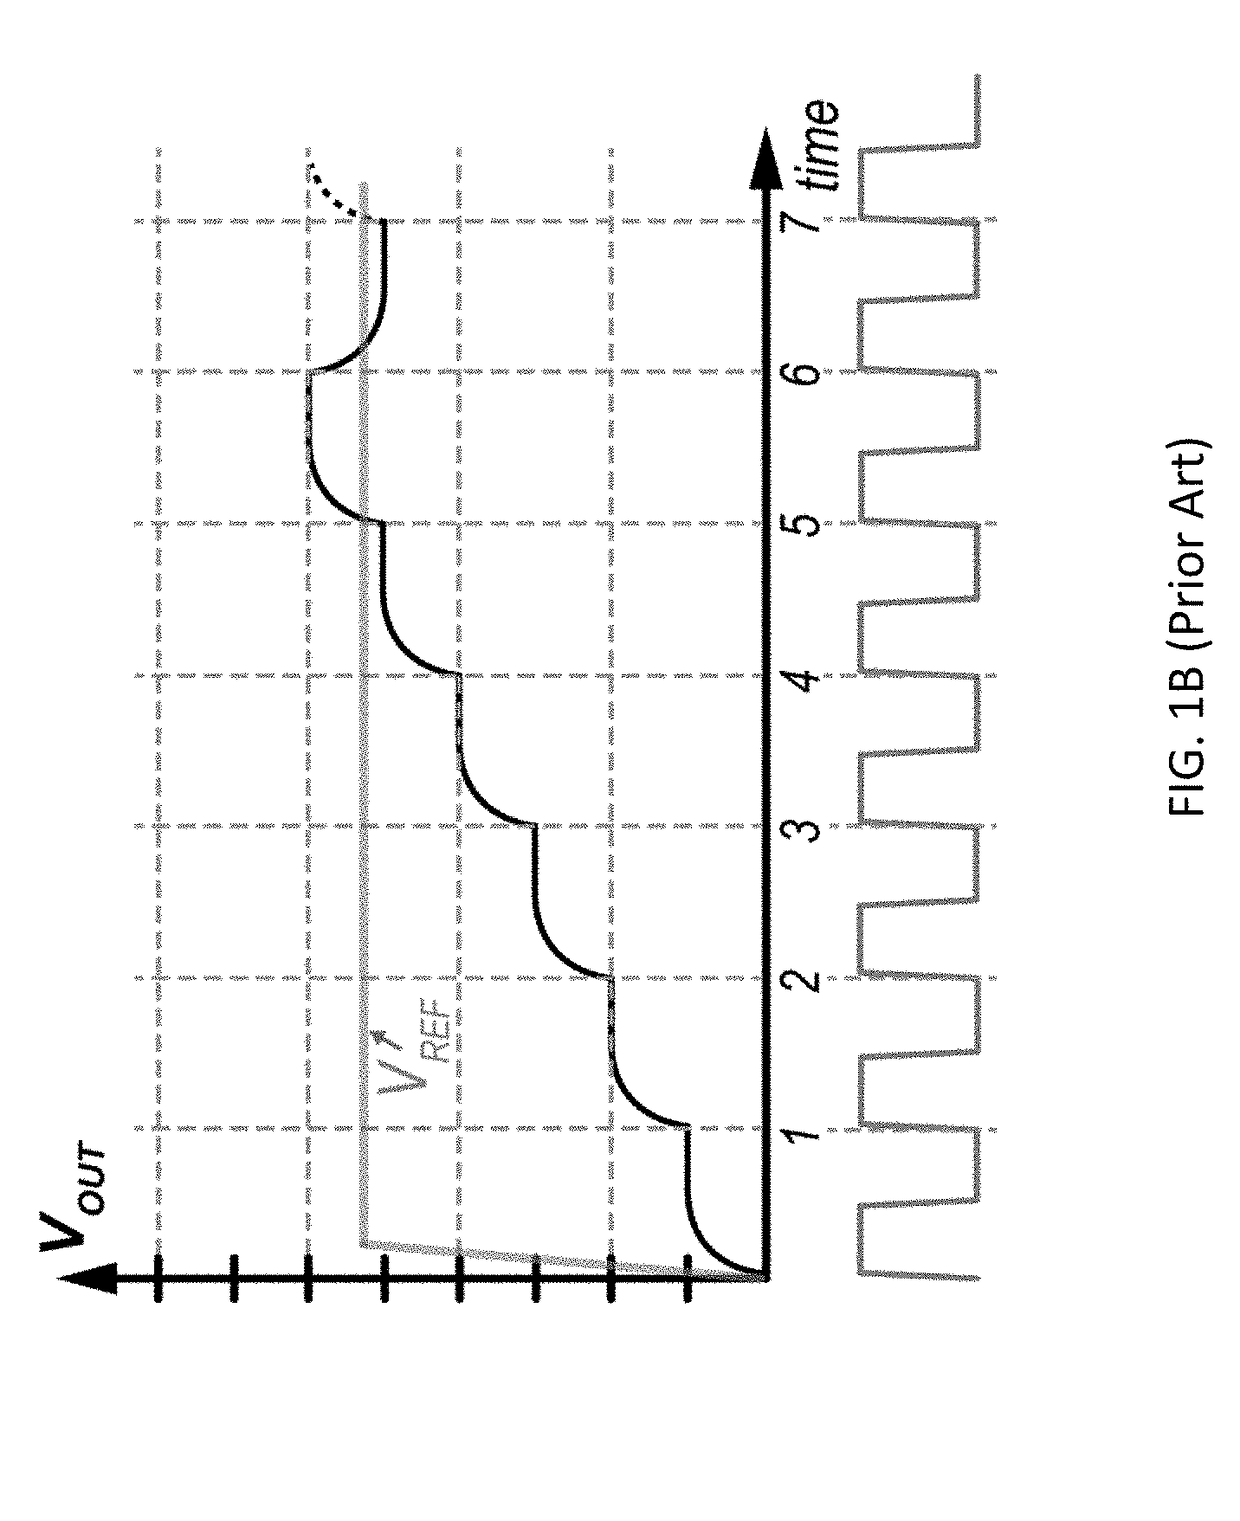 Successive approximation digital voltage regulation methods, devices and systems